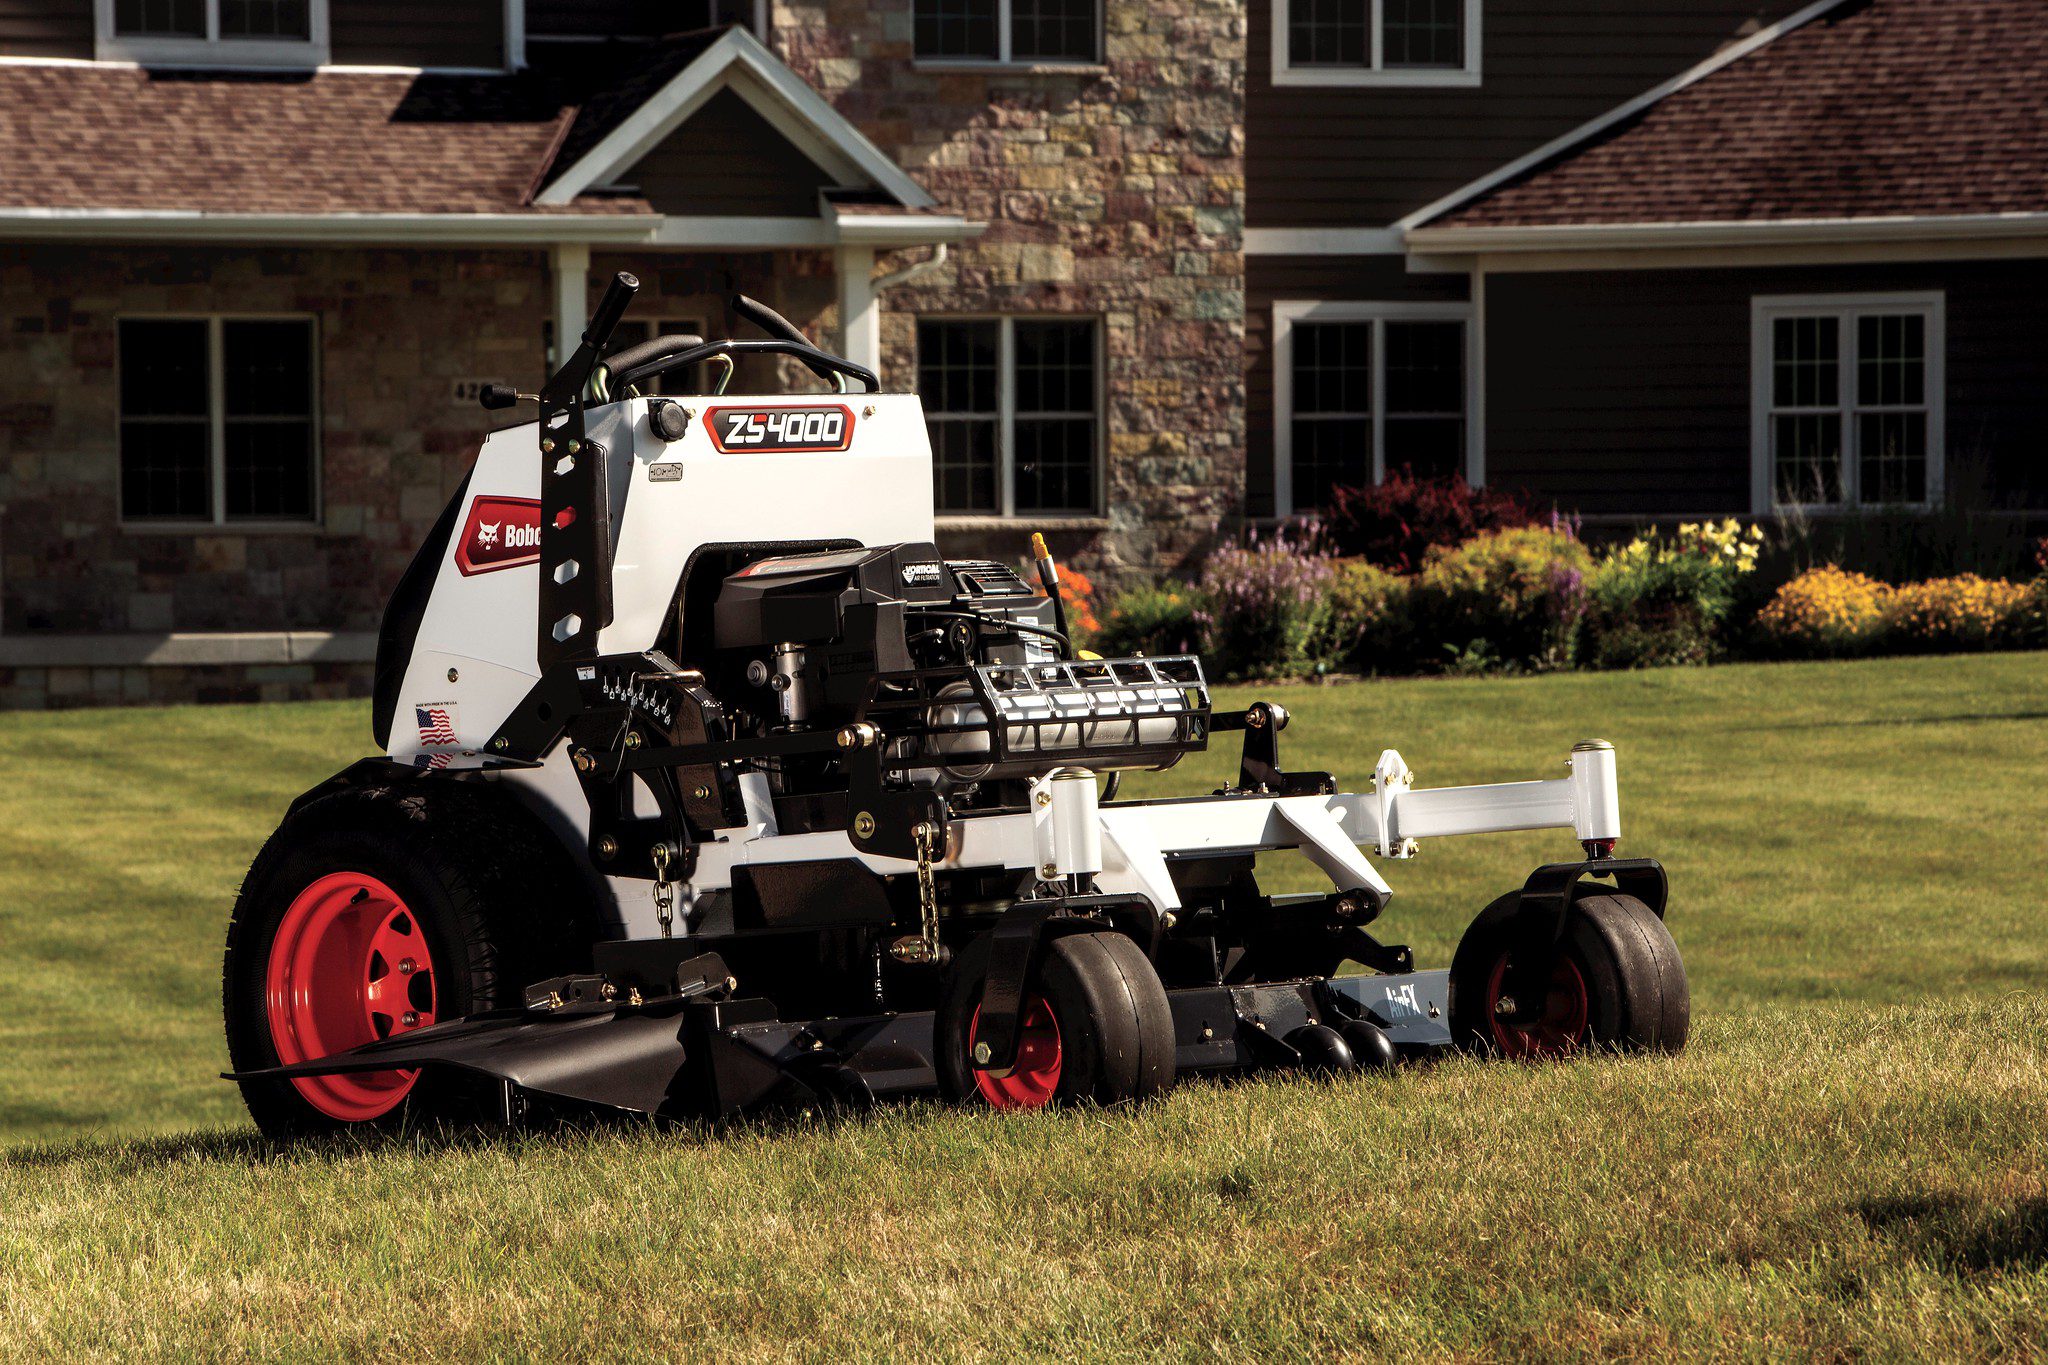 Browse Specs and more for the Bobcat ZS4000 Stand-On Mower 61″ - KC Bobcat